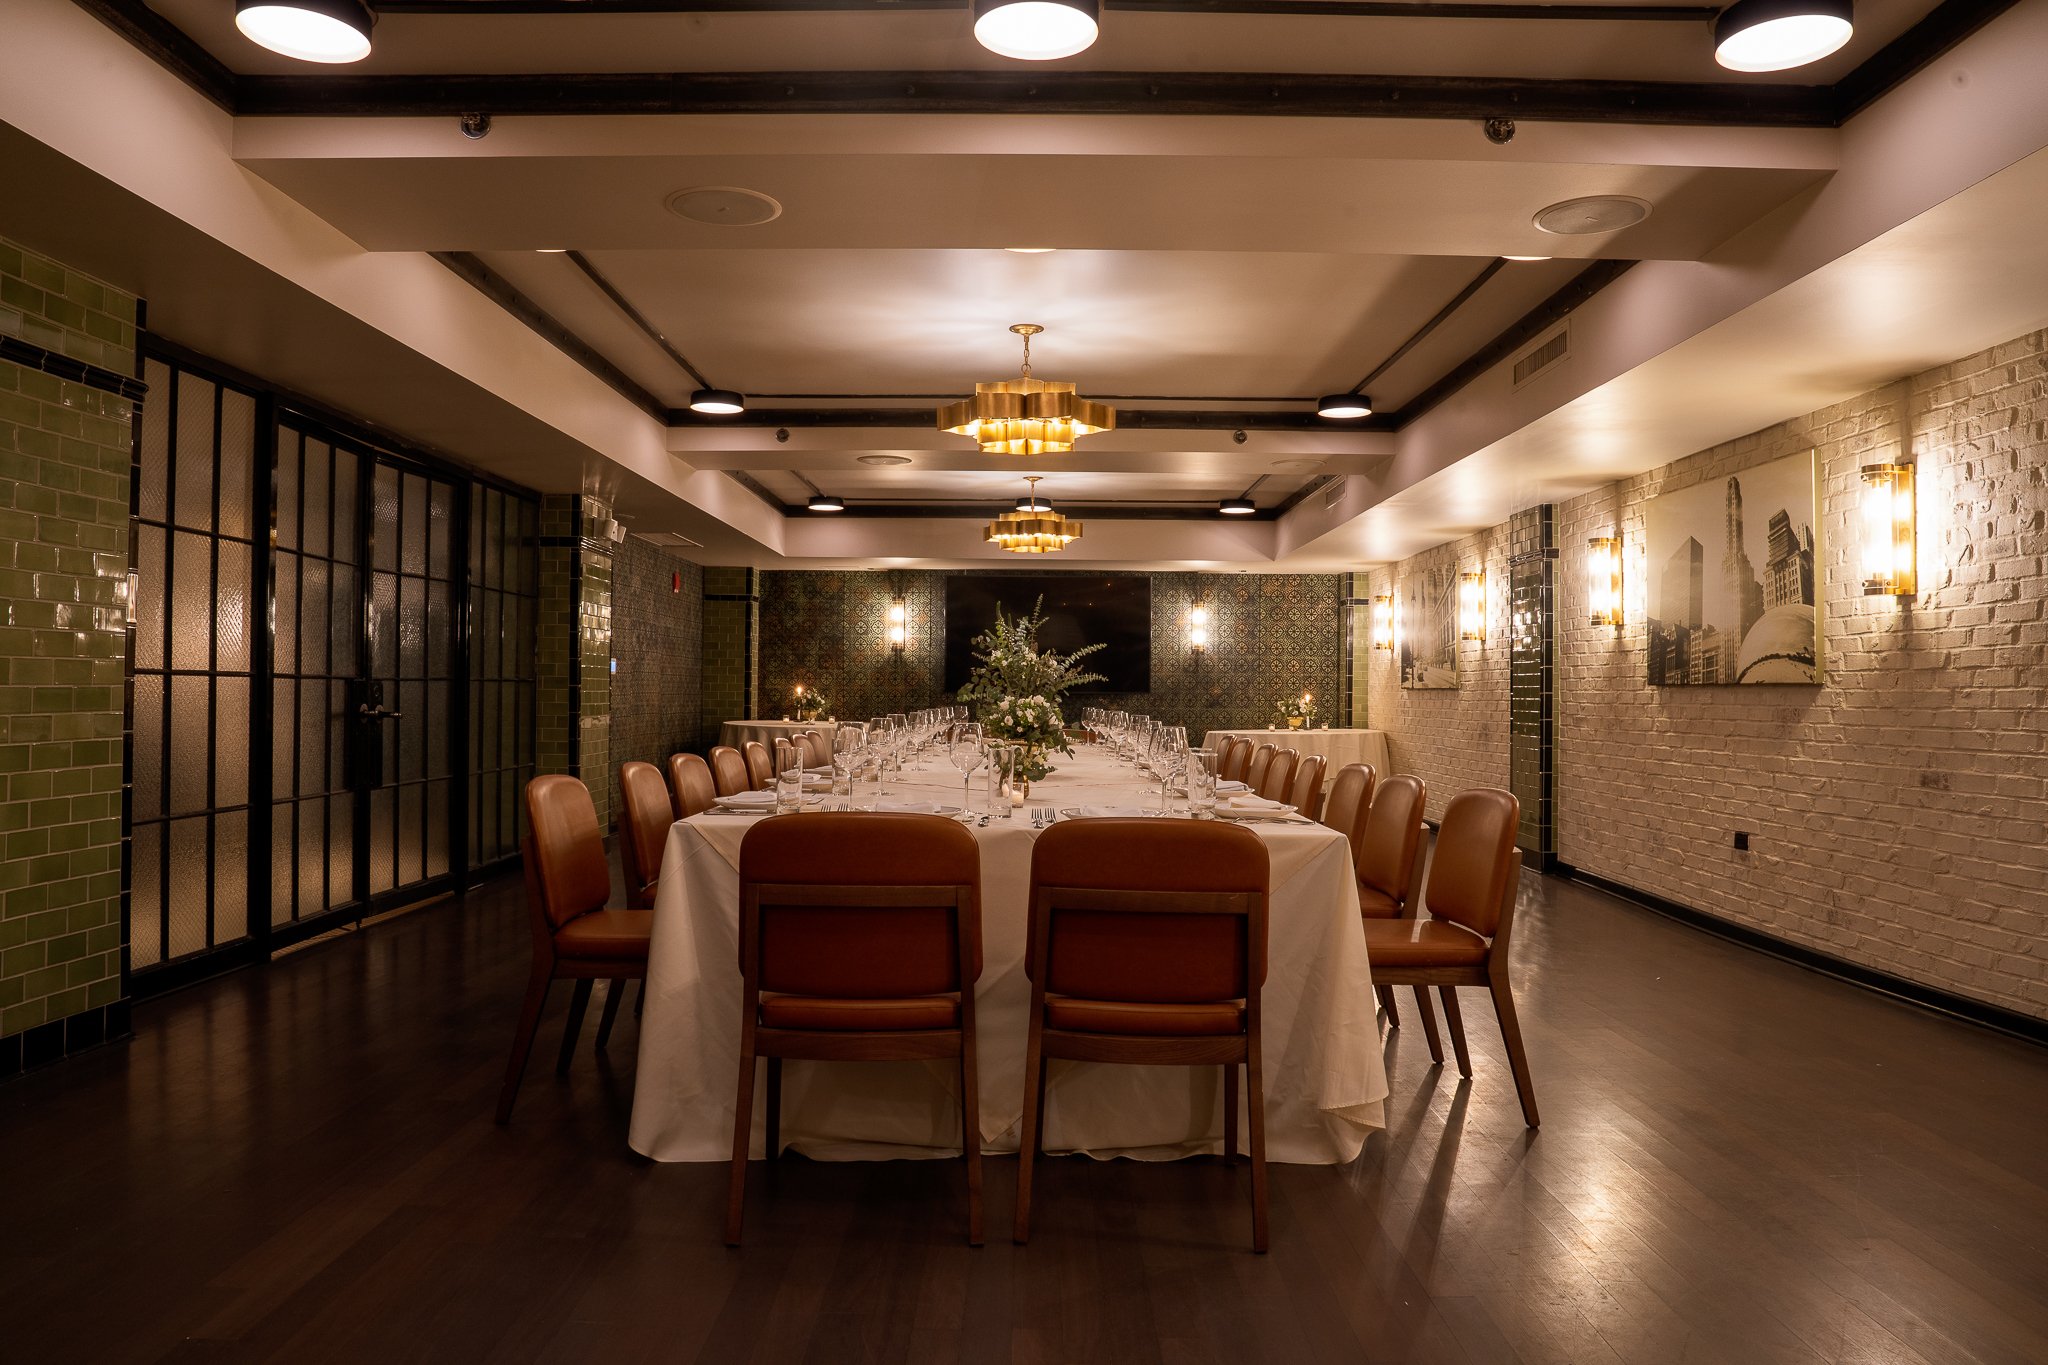 Zoomed-out view: spacious room, central table, linens, floral decor